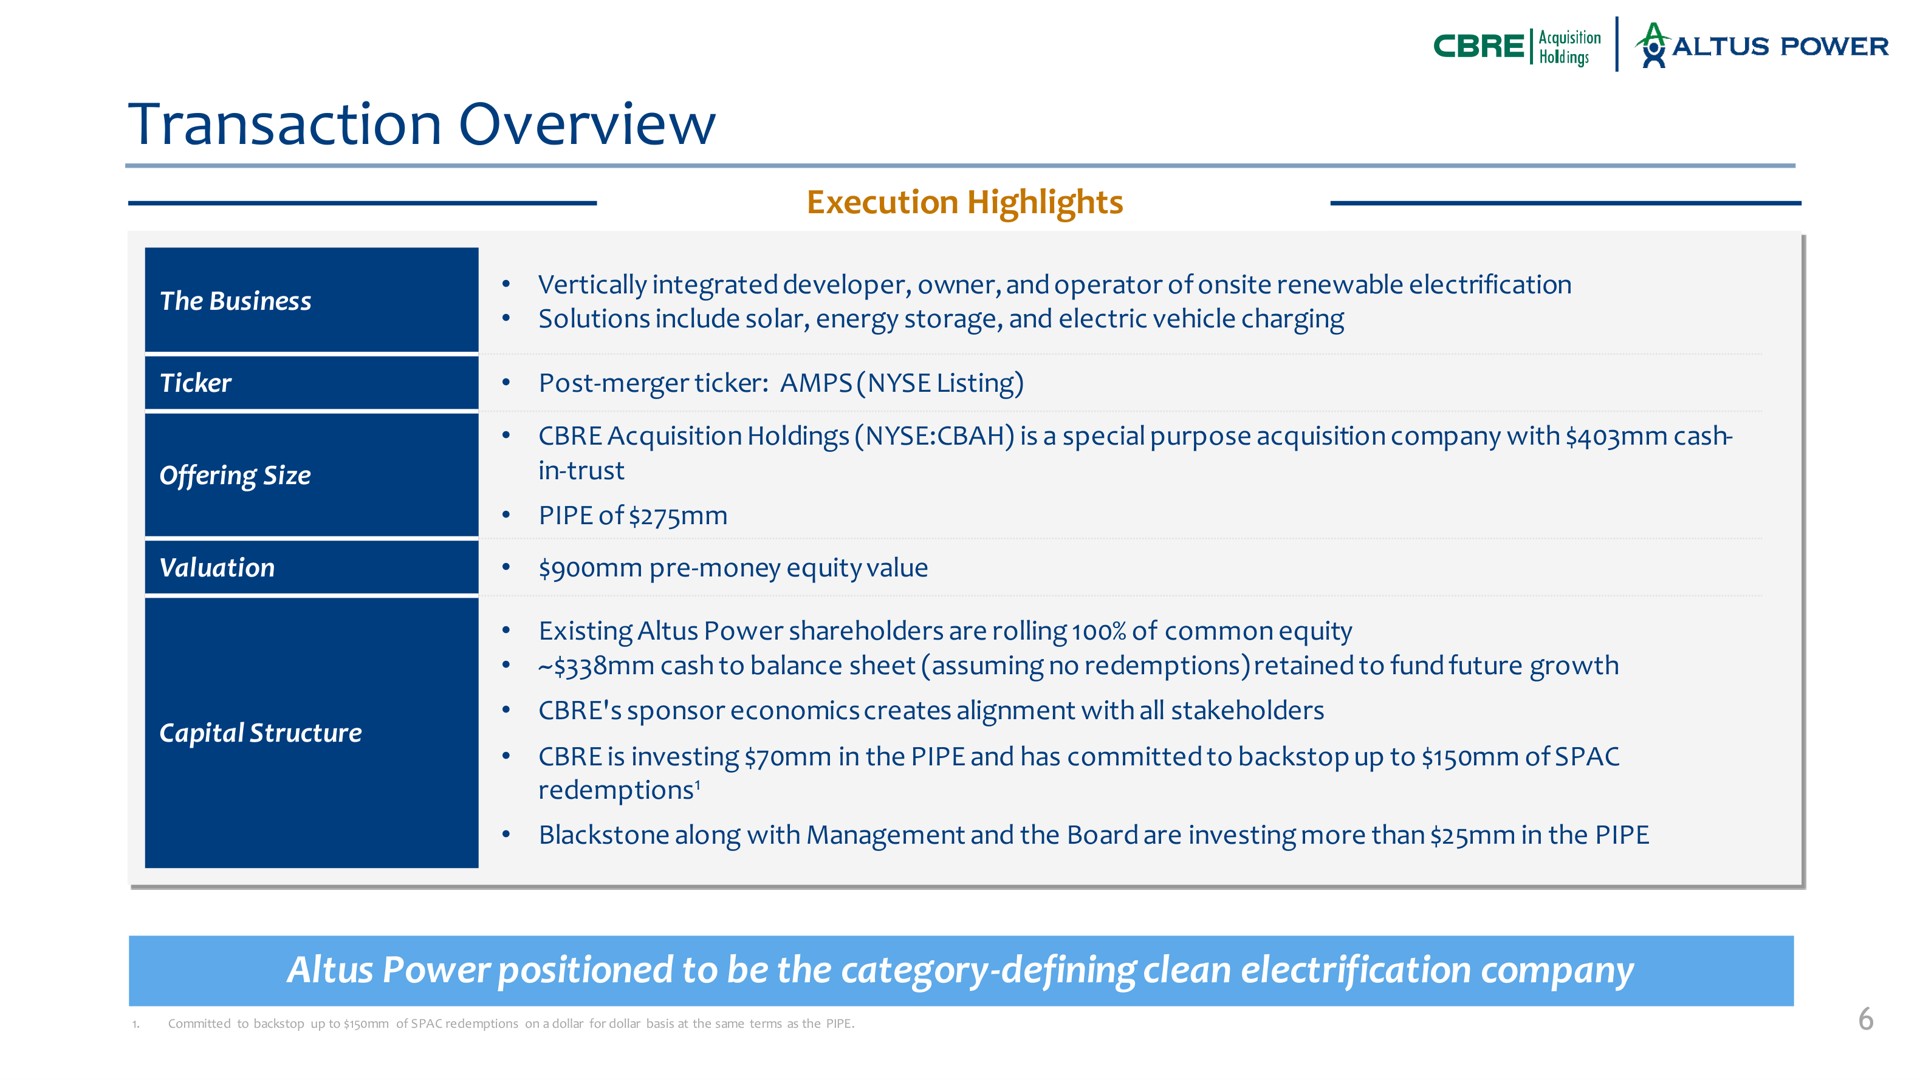 transaction overview execution highlights power positioned to be the category defining clean electrification company oxy a vertically integrated developer owner and operator of renewable solutions include solar energy storage and electric vehicle charging post merger ticker listing acquisition holdings is a special purpose acquisition with cash in trust existing shareholders are rolling of common equity sponsor economics creates alignment with all stakeholders along with management and board are investing more than in pipe | Altus Power